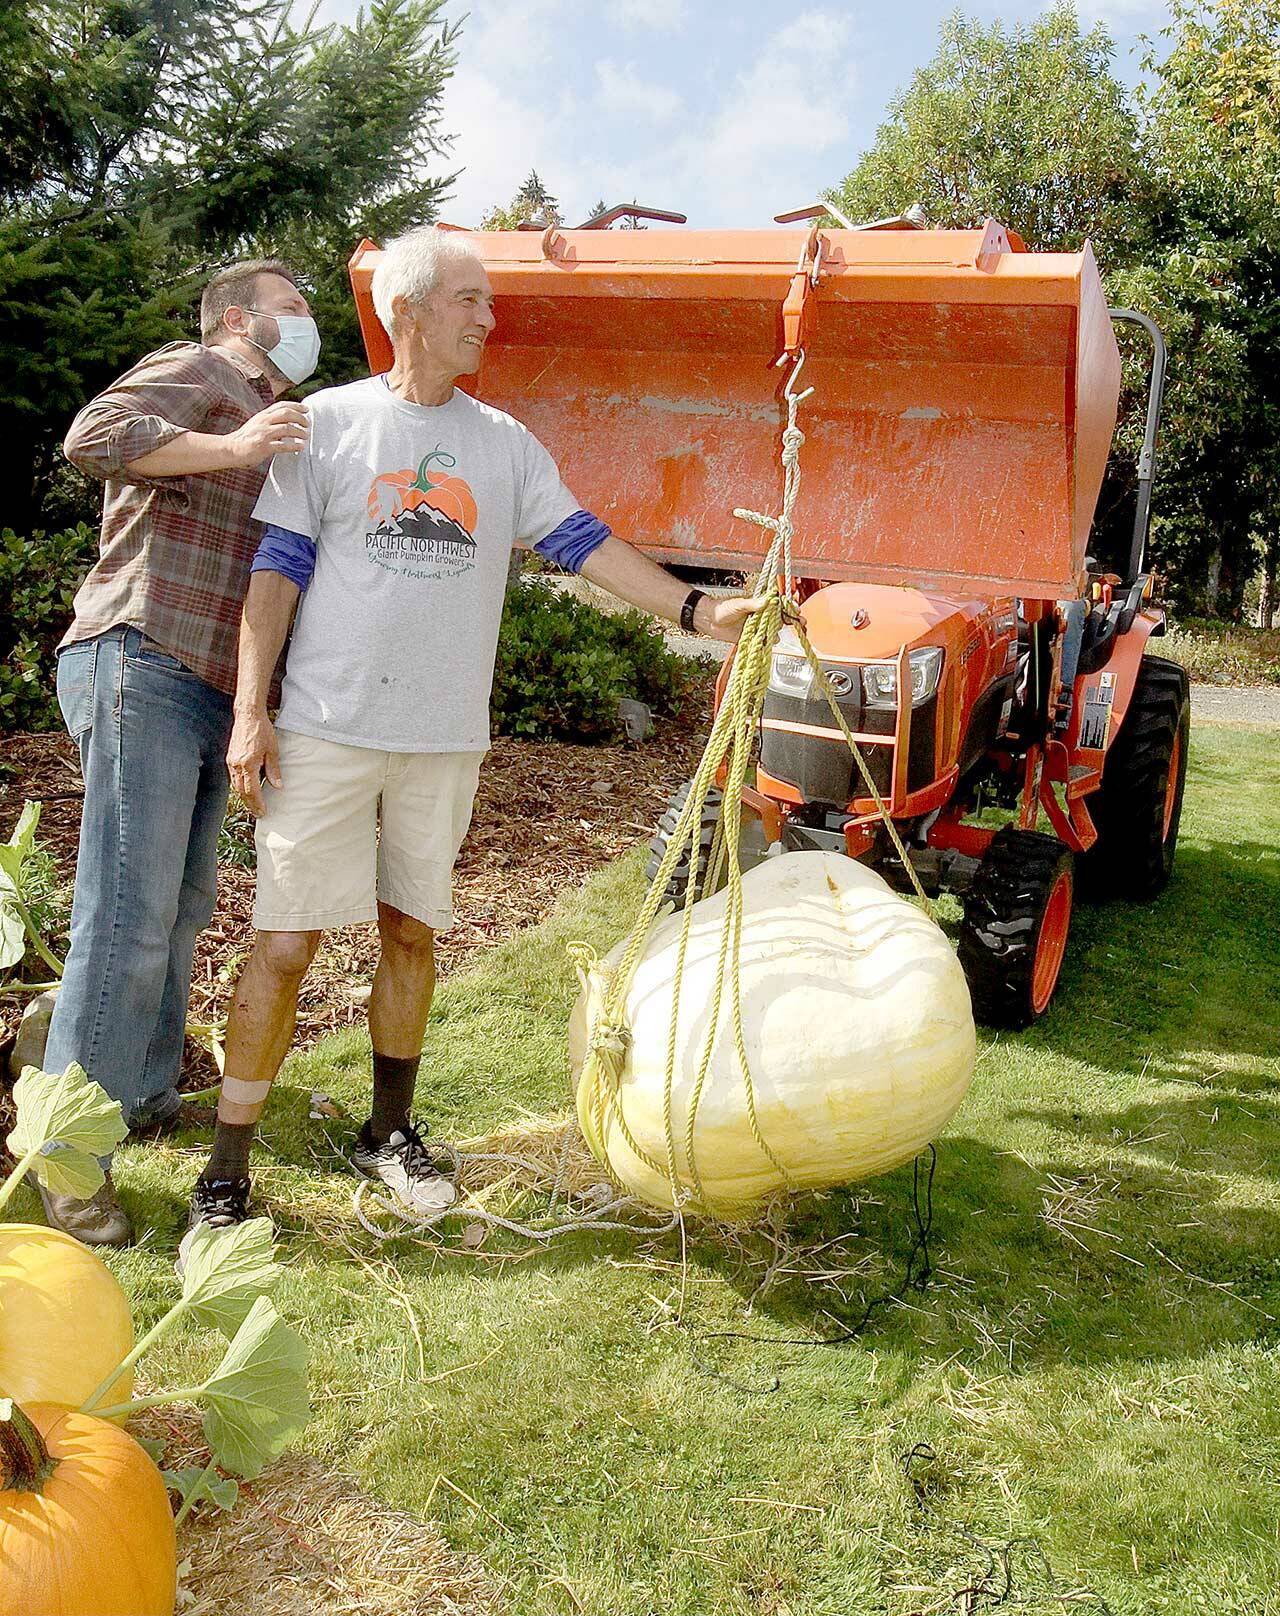 Duane Grego, left, and Dan Welden check the scales on Welden’s winning pumpkin at 166.2 pounds Sunday. A giant pumpkin contest is conducted each year at the Evergreen Country Estates neighborhood on Goss Road south of Port Angeles. Welden, who started the contest 14 years ago, gives each of his neighbors special pumpkin sprouts he has started from seeds from the Northwest Giant Pumpkin Growers Association. The growing season starts around May 1 and the neighbors gather for a weigh-in and to have a pumpkin potluck party this time of year. Only one pumpkin weighed more than 100 pounds out of the dozen entries. (Dave Logan/For Peninsula Daily News)